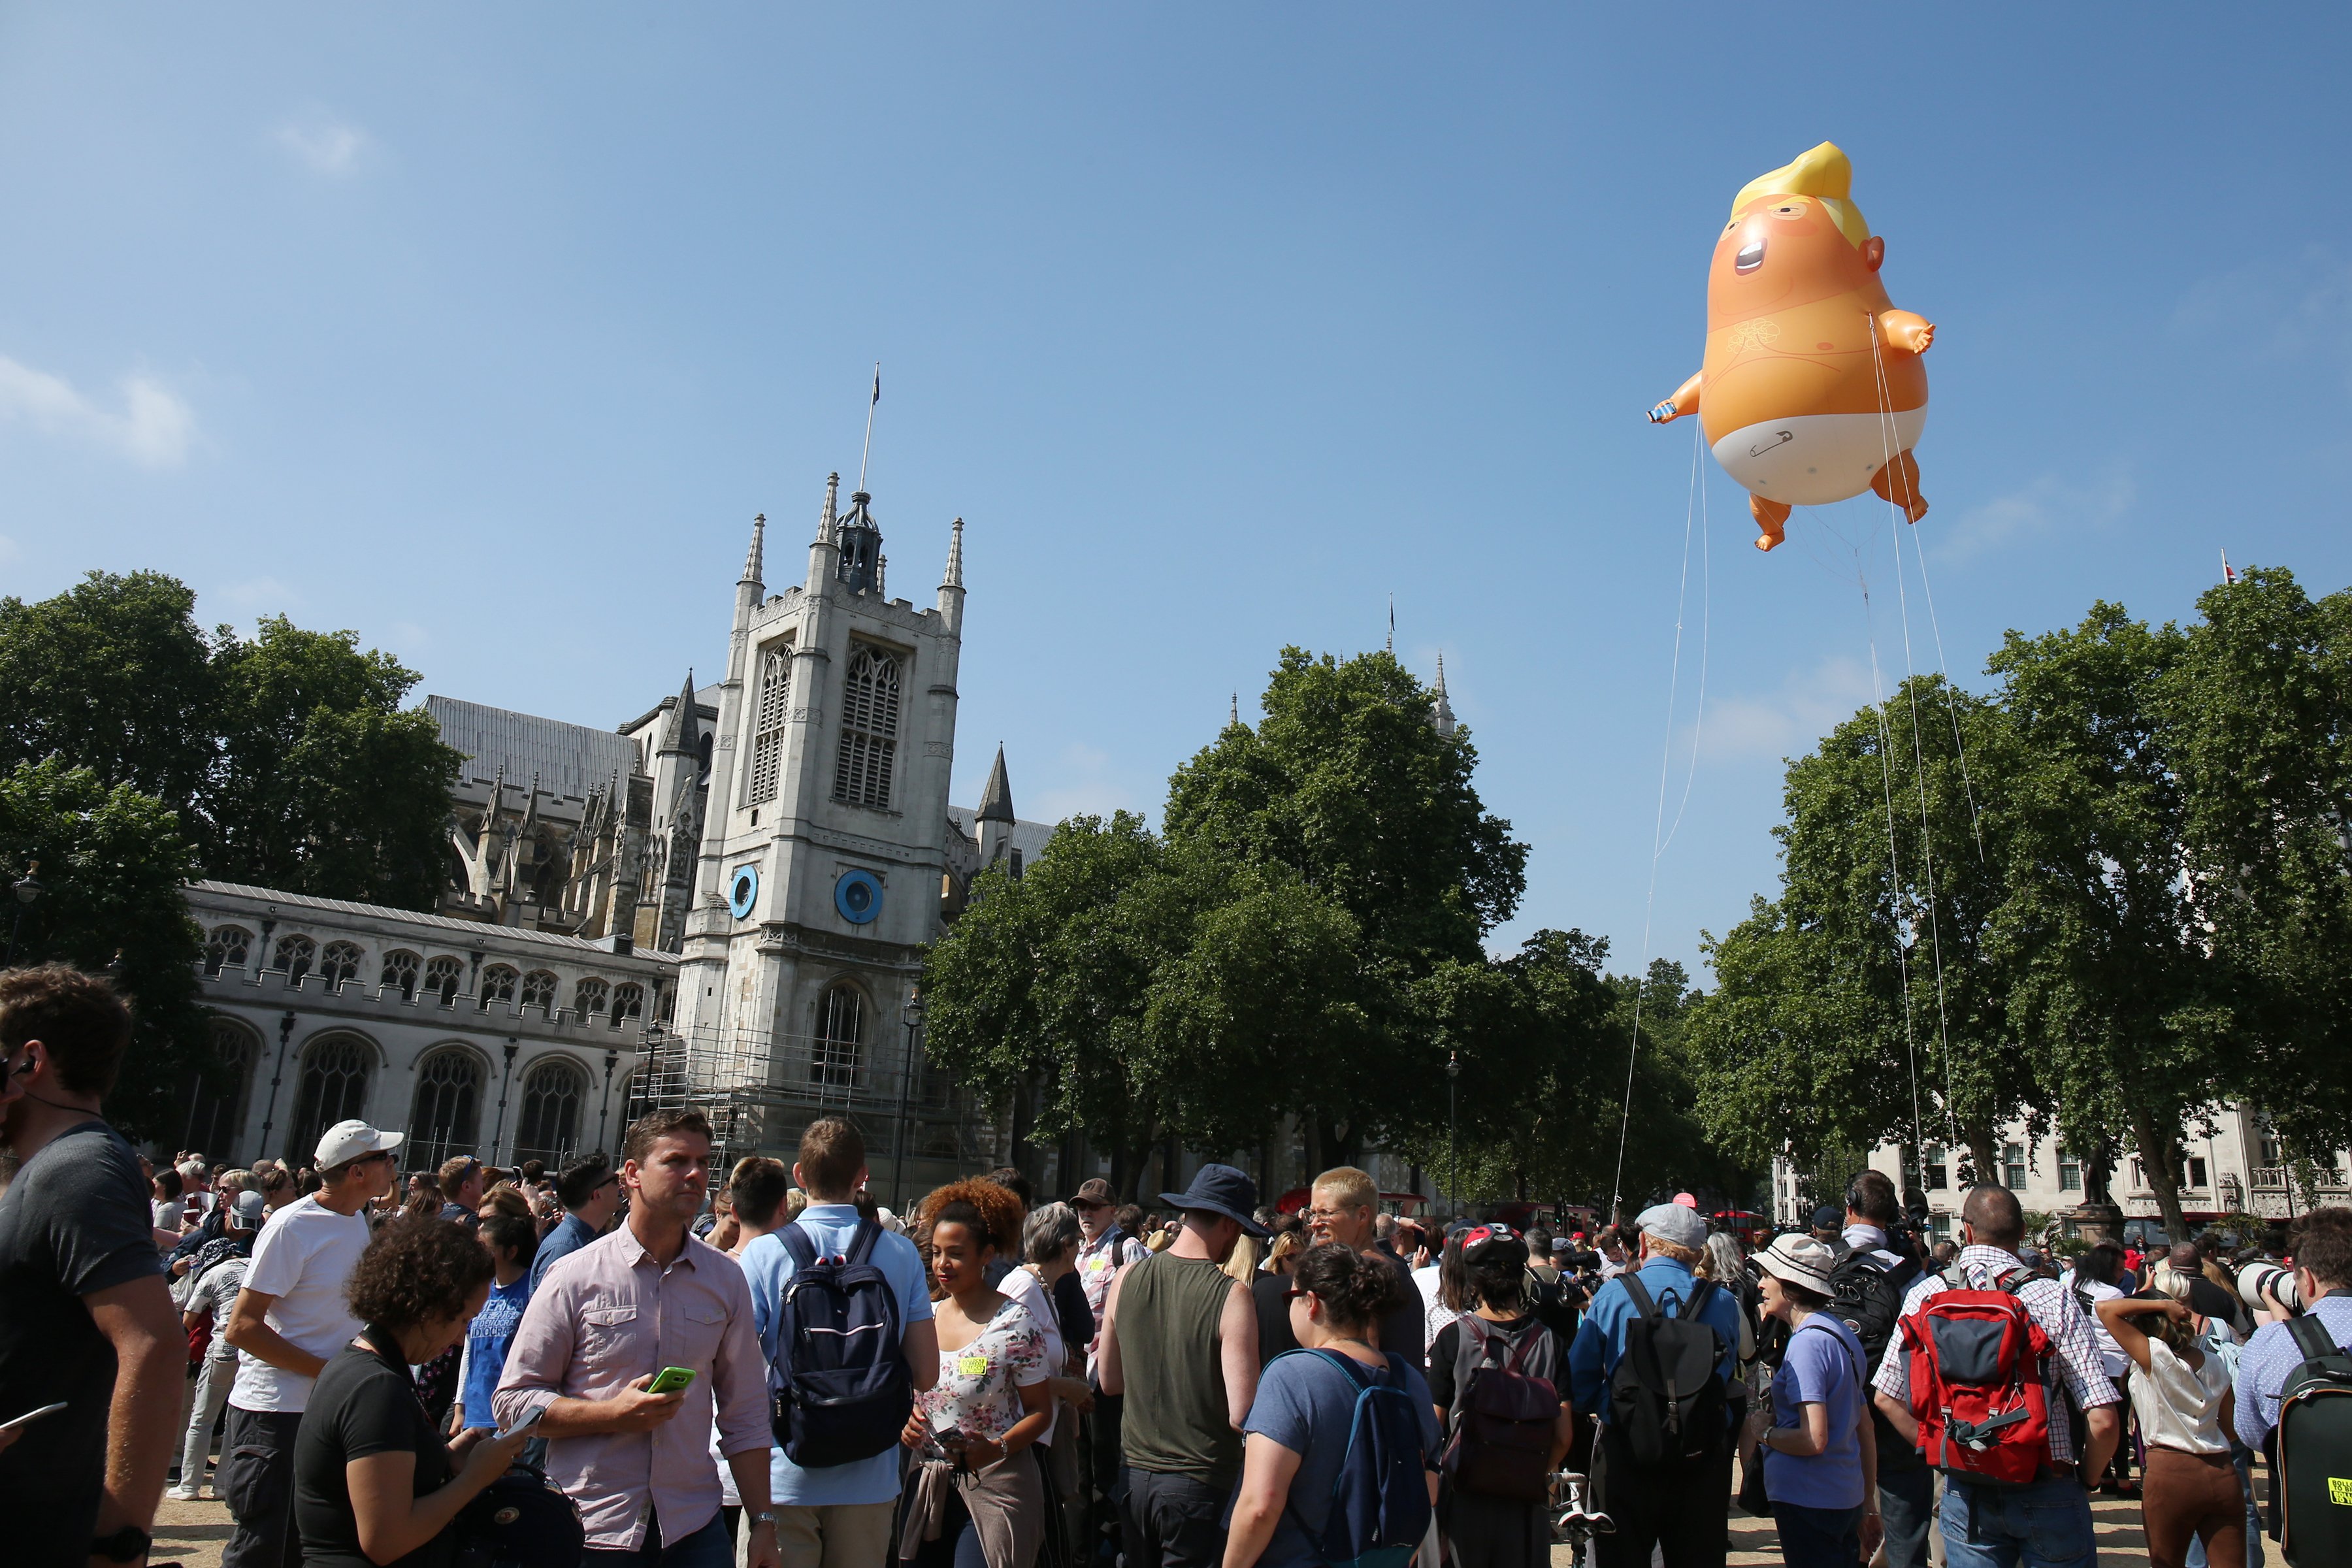 The Baby Trump blimp flying over Parliament Square in London, England | Photo: Getty Images